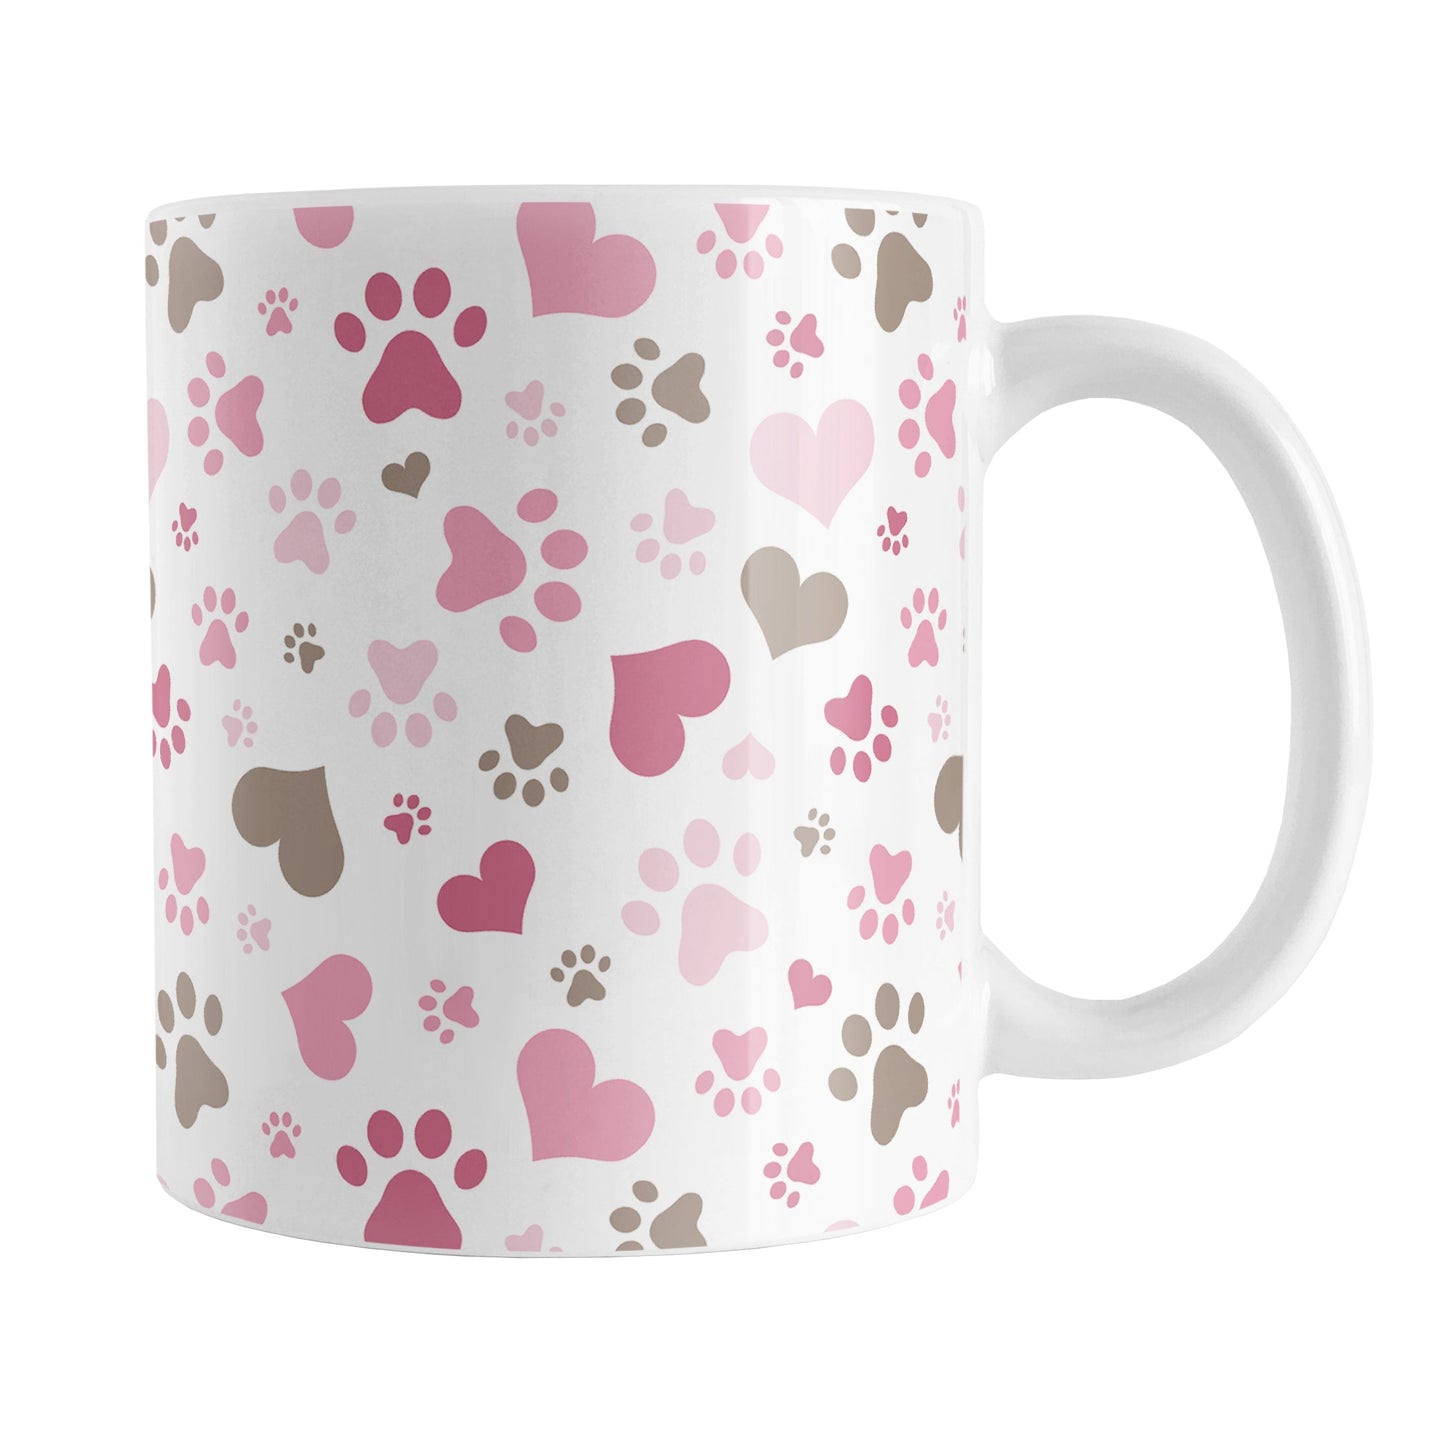 Pink Hearts and Paw Prints Mug (11oz) at Amy's Coffee Mugs. A ceramic coffee mug designed with a pattern of hearts and paw prints in brown and different shades of pink that wraps around the mug to the handle. This mug is perfect for people love dogs and cute paw print designs.